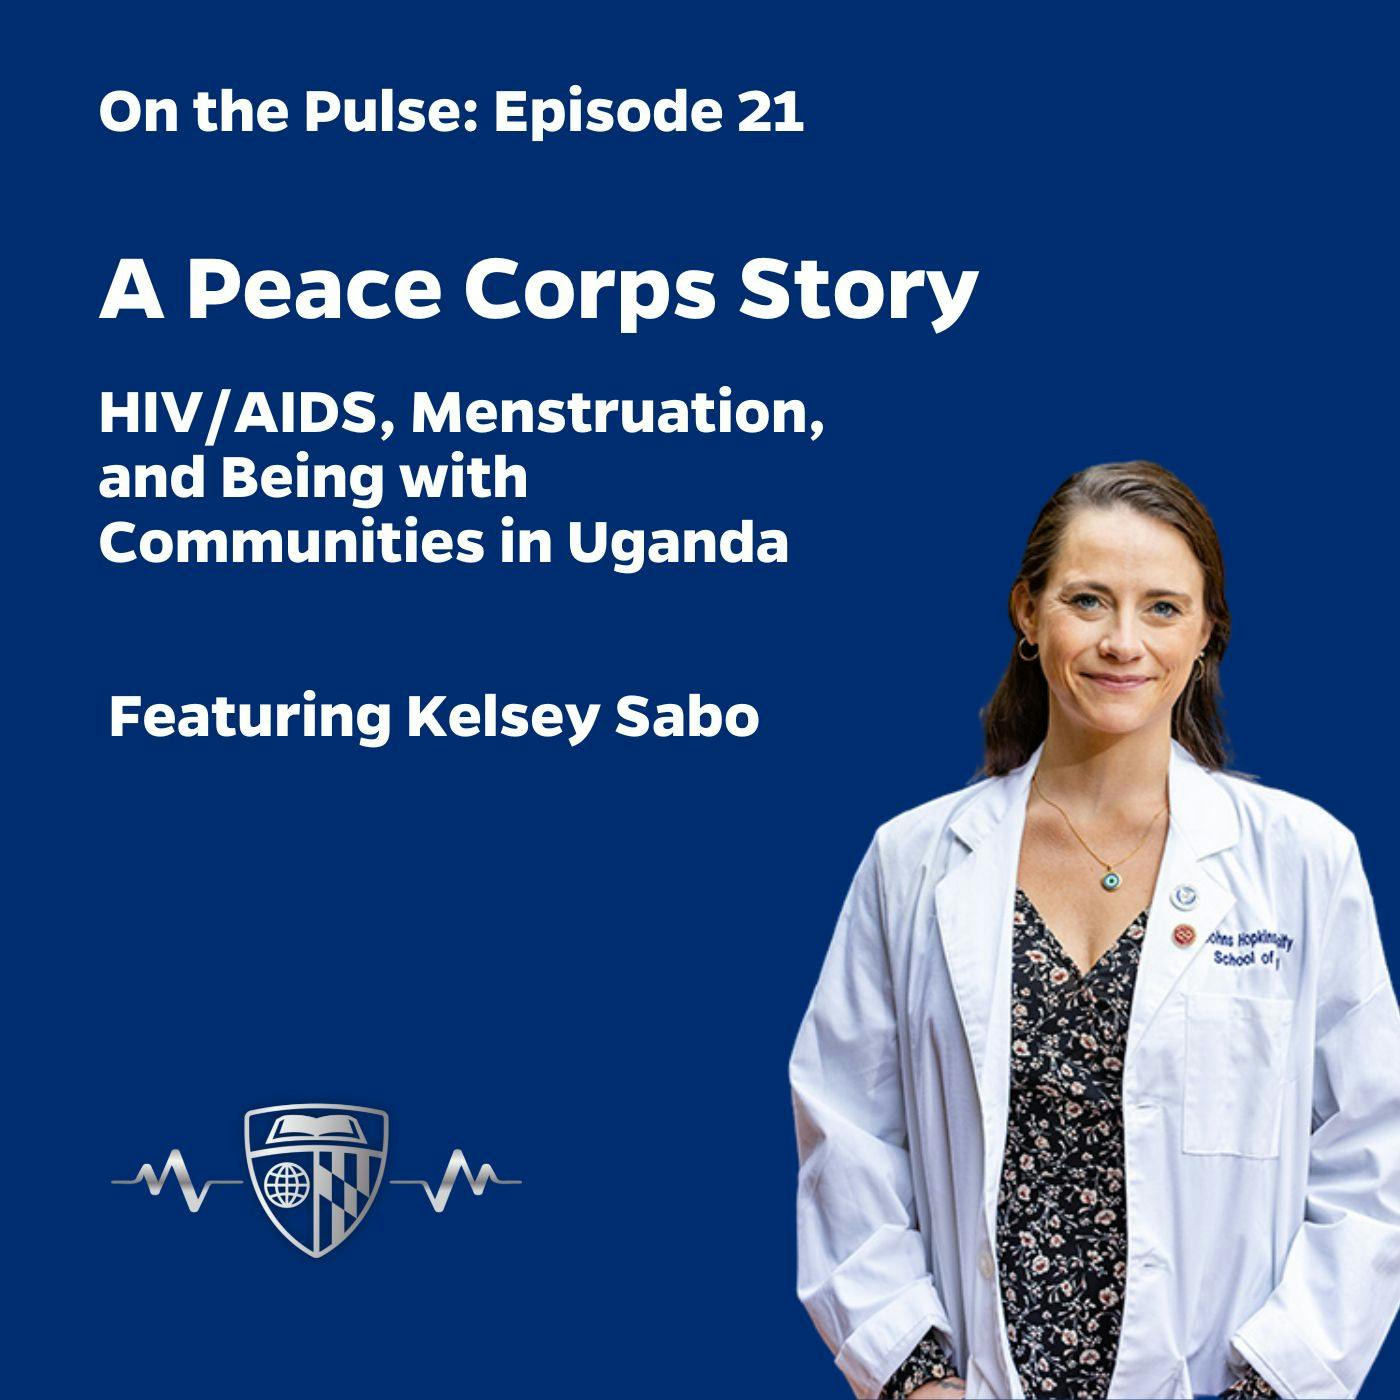 Episode 21: A Peace Corps Story about HIV/AIDS, Menstruation, and Being with Communities in Uganda